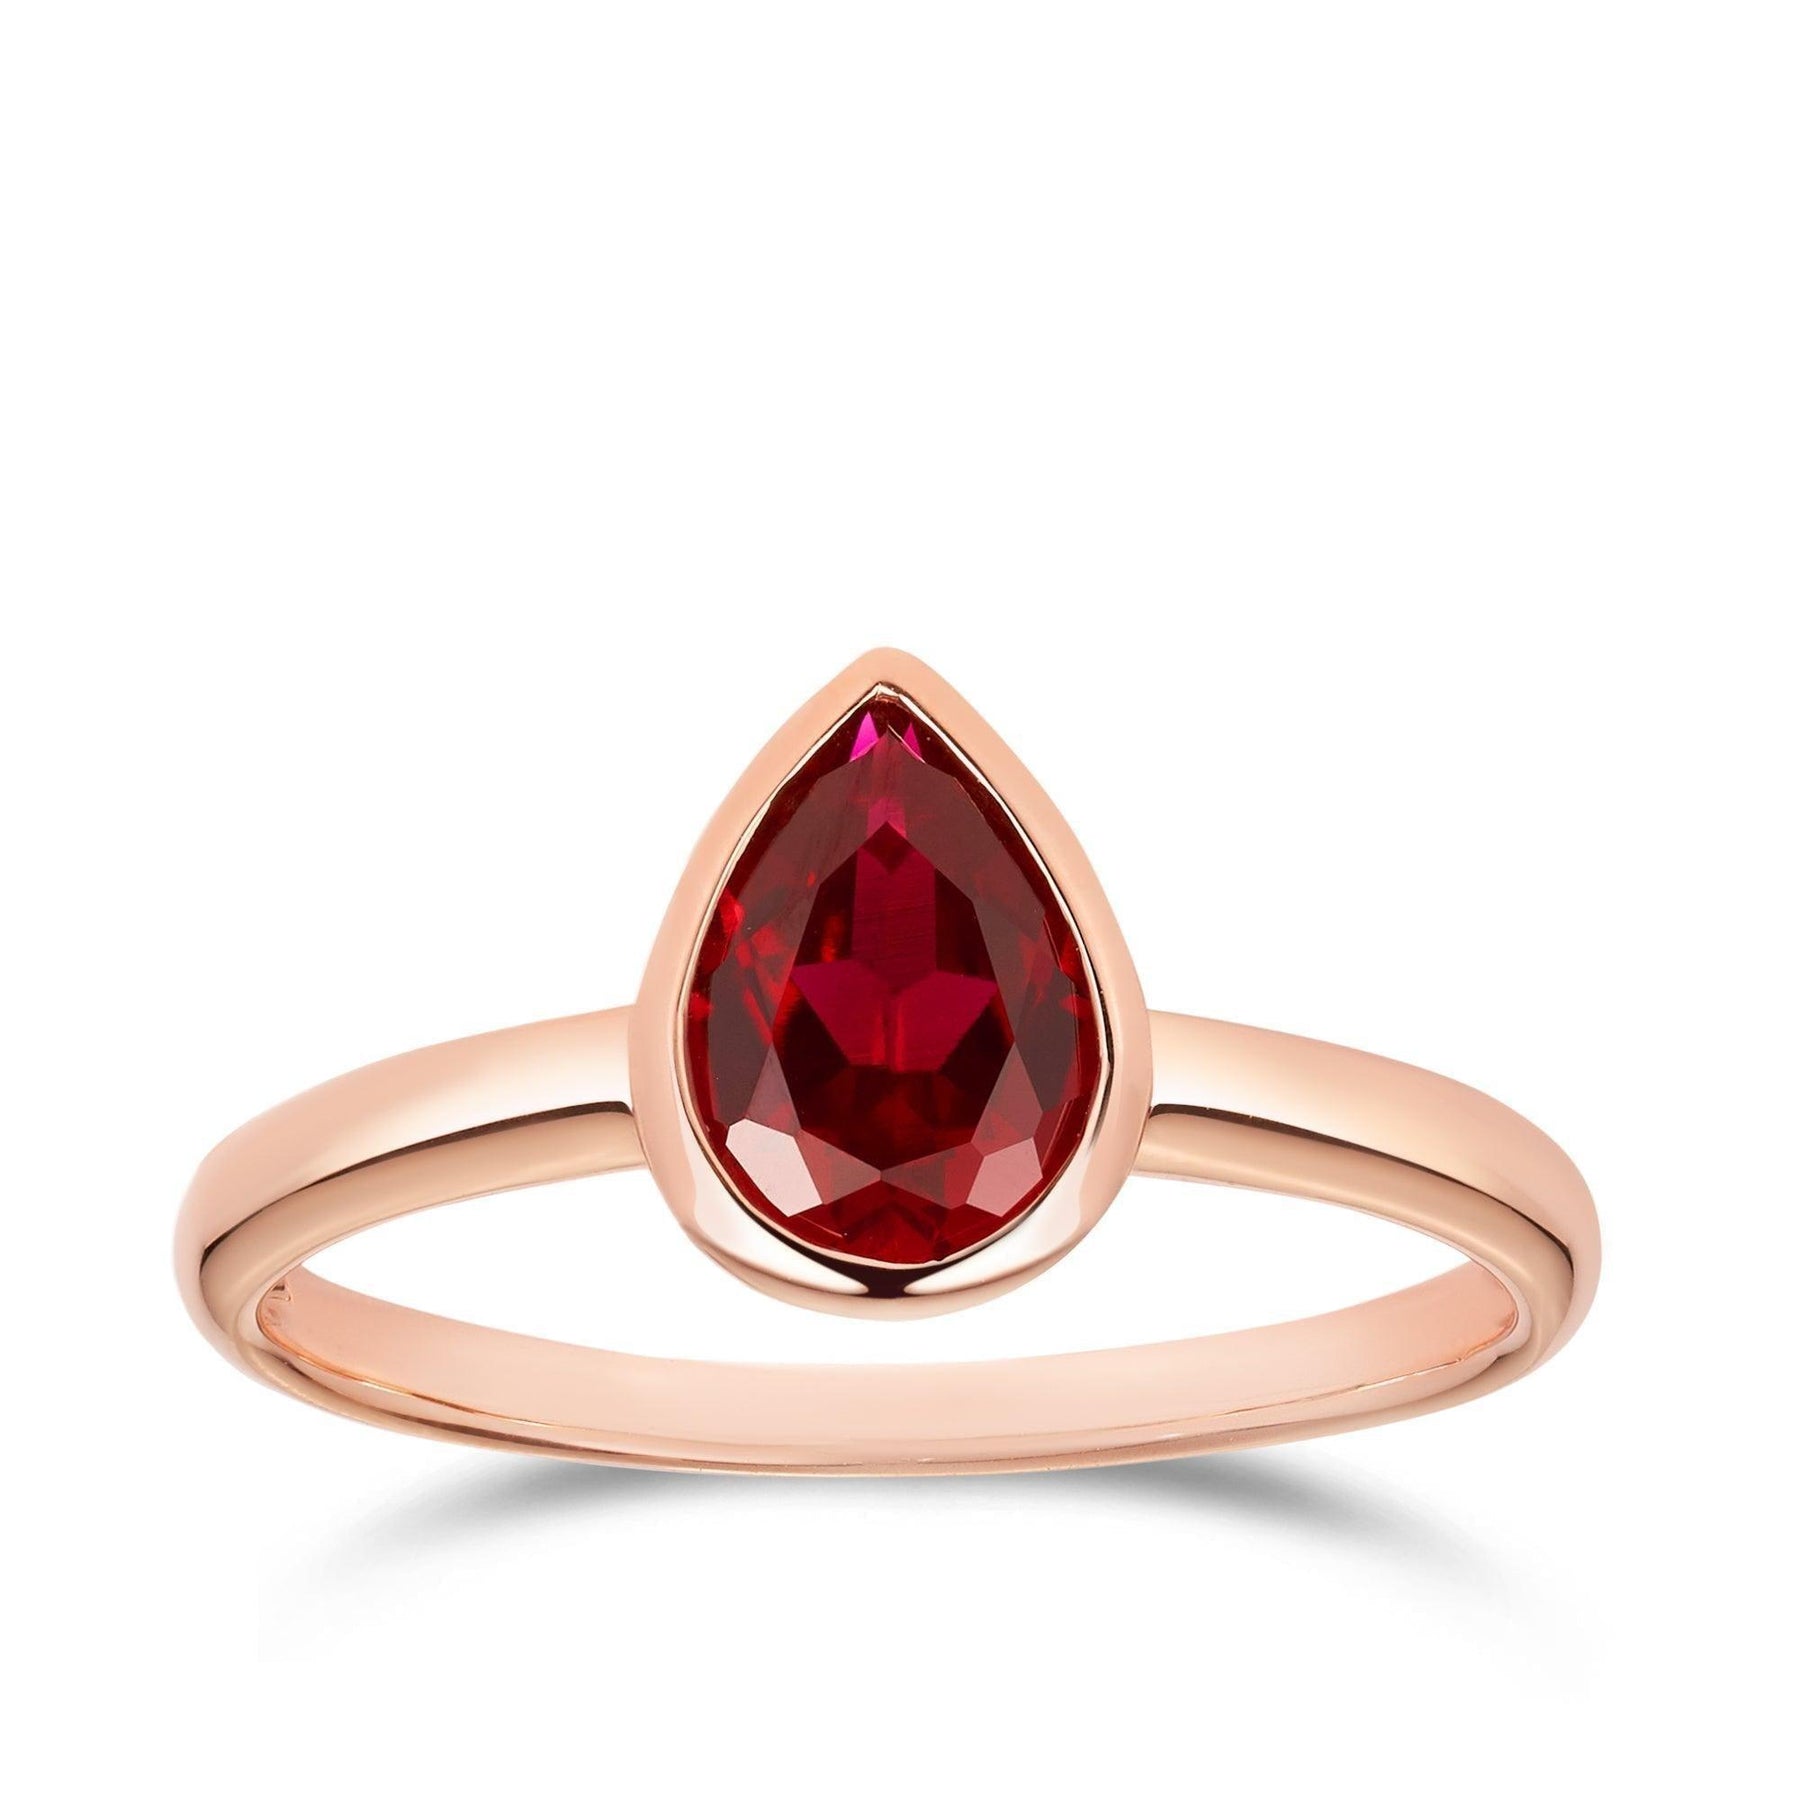 Created Ruby Pear Shape Ring in 9ct Rose Gold - Wallace Bishop